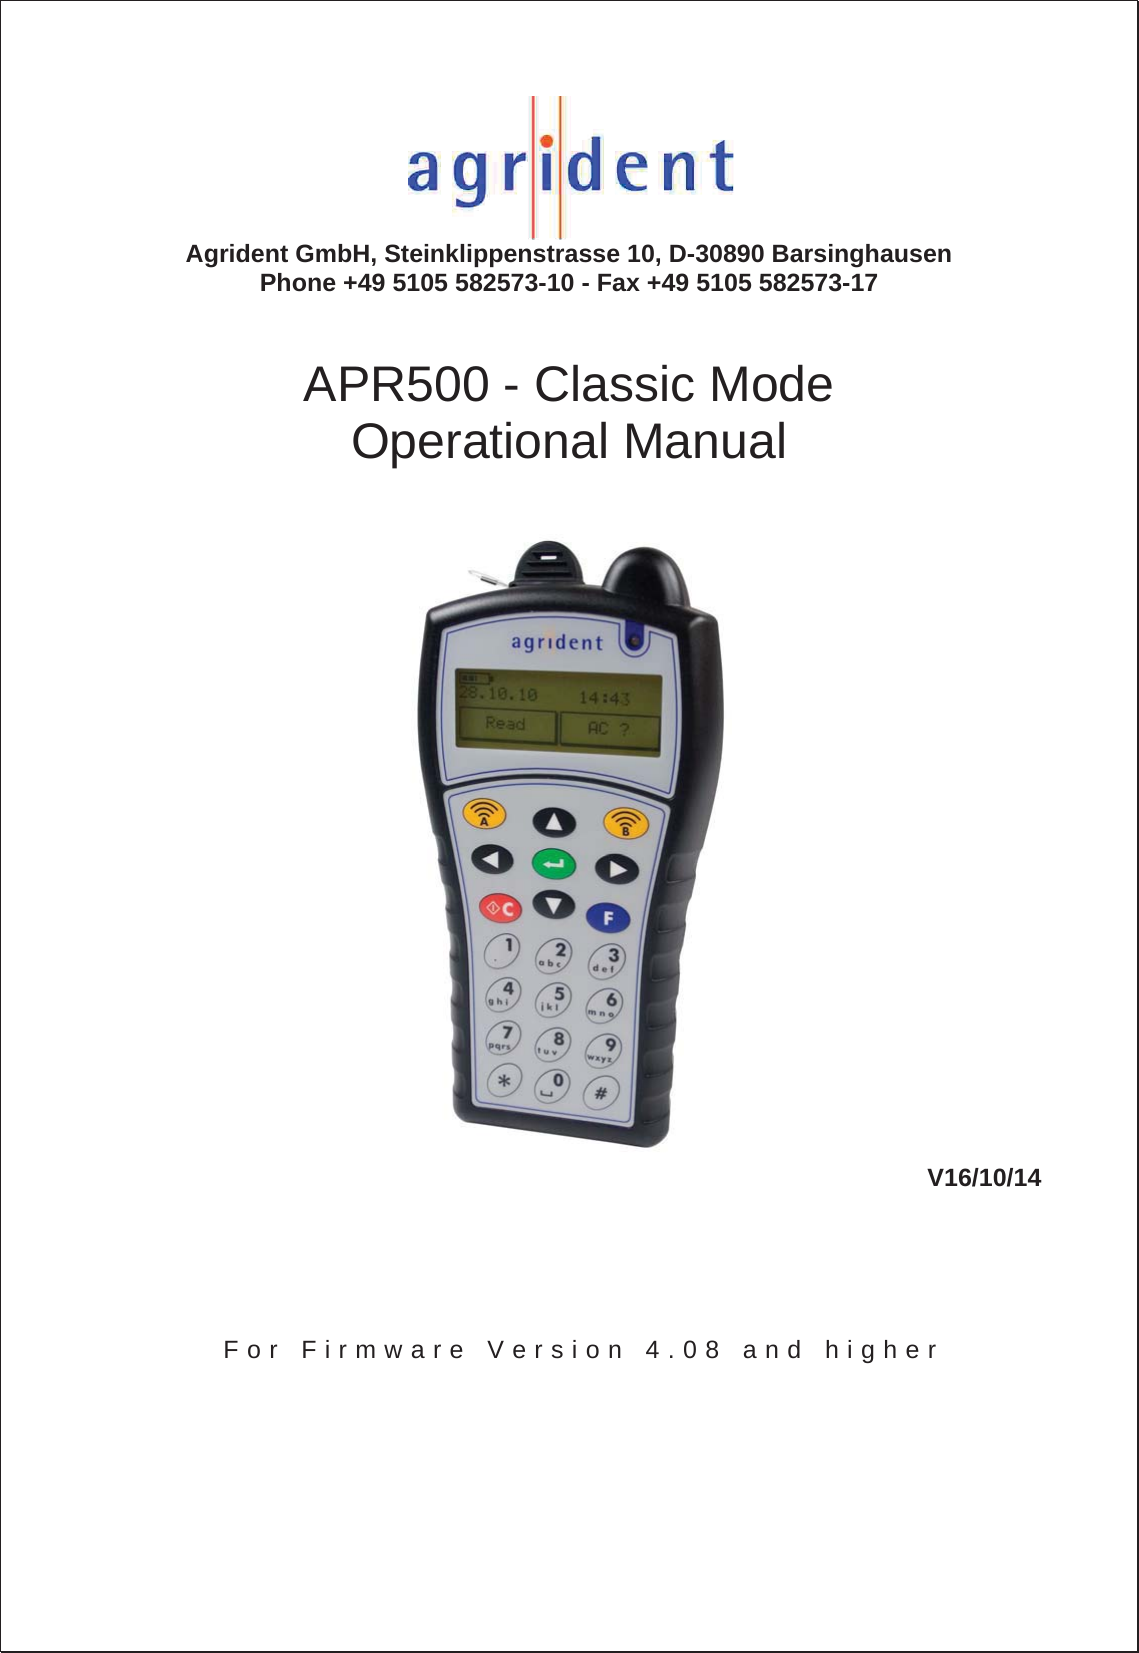 Agrident GmbH, Steinklippenstrasse 10, D-30890 BarsinghausenPhone +49 5105 582573-10 - Fax +49 5105 582573-17 APR500 - Classic Mode Operational Manual V16/10/14For Firmware Version 4.08 and higher 